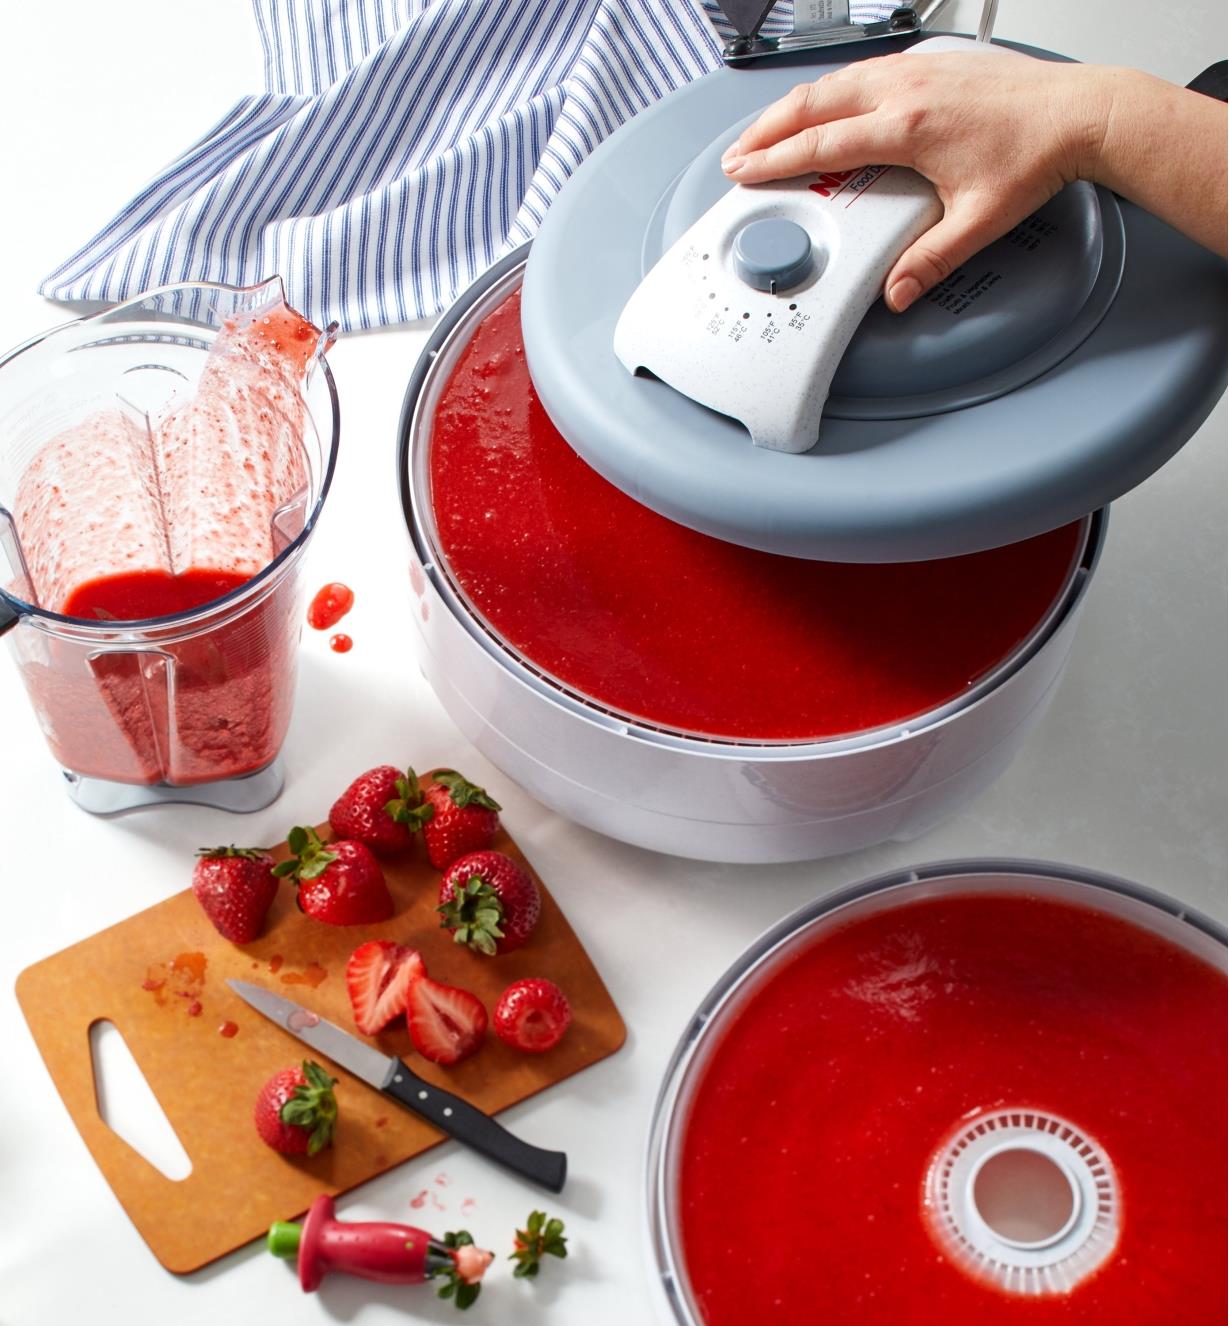 Making fruit rolls with fresh strawberries using the smooth sheet in the food dehydrator